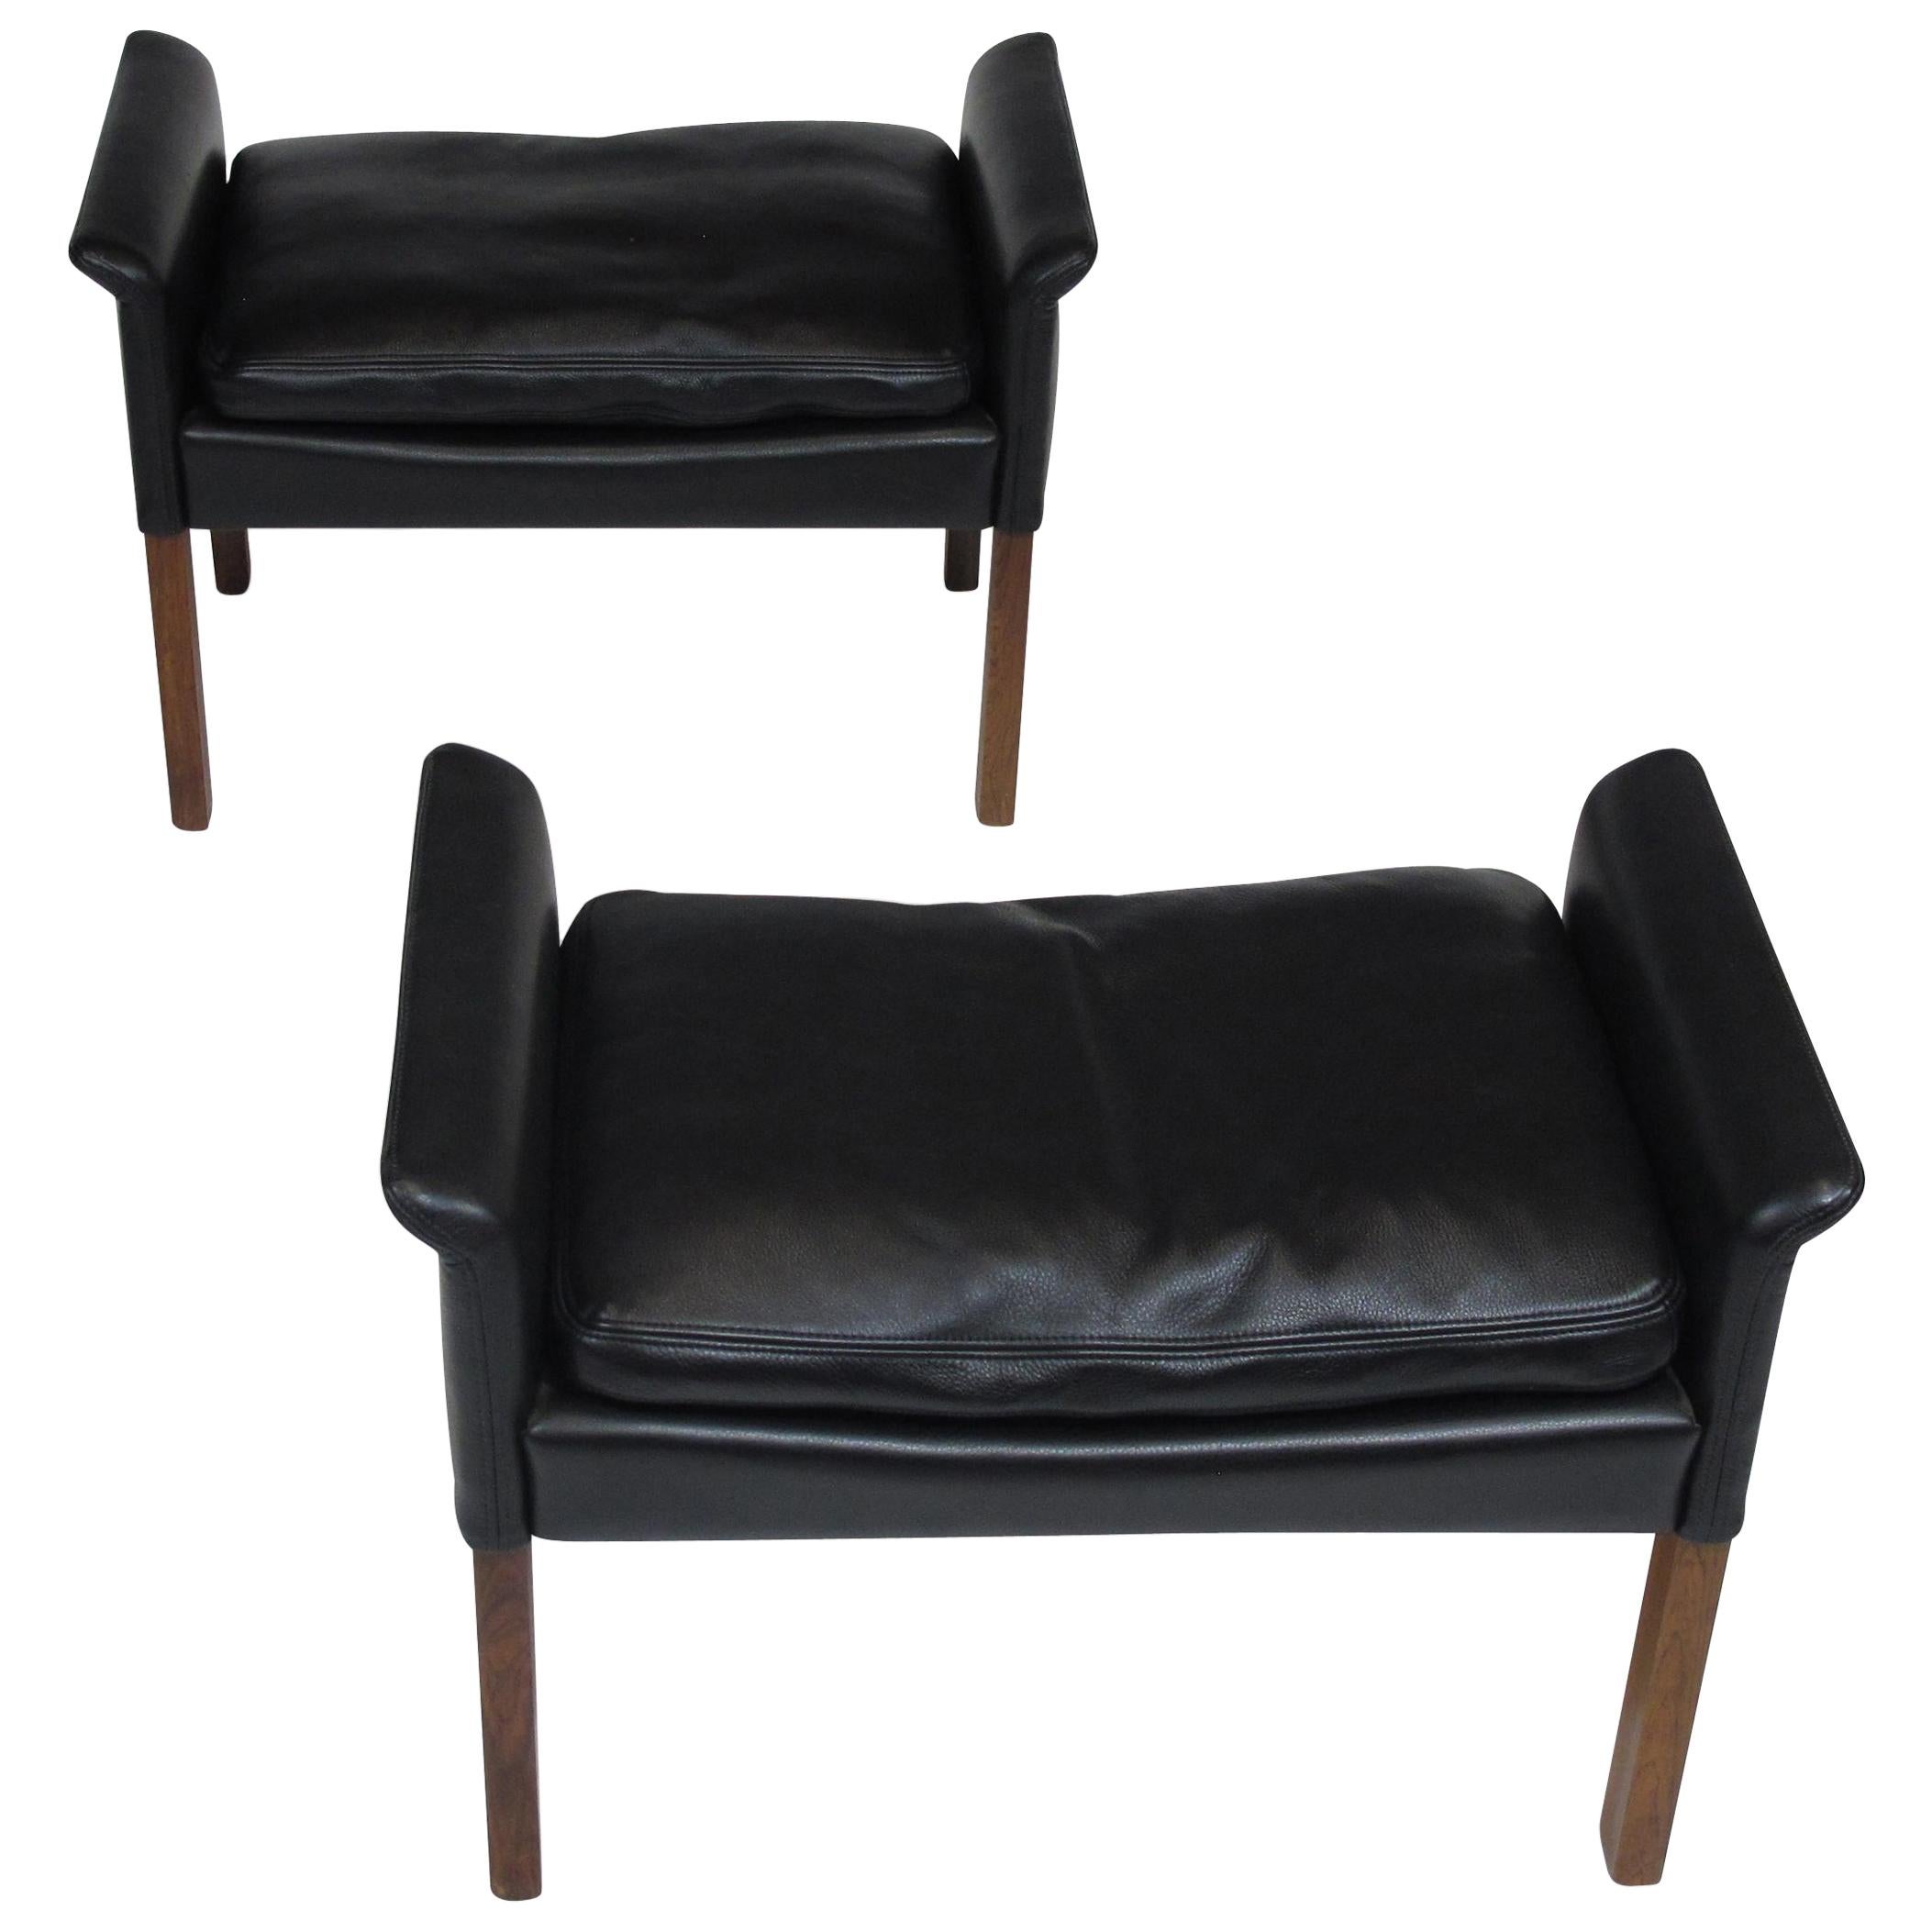 Hans Olsen Rosewood and Black Leather Ottomans, A Pair